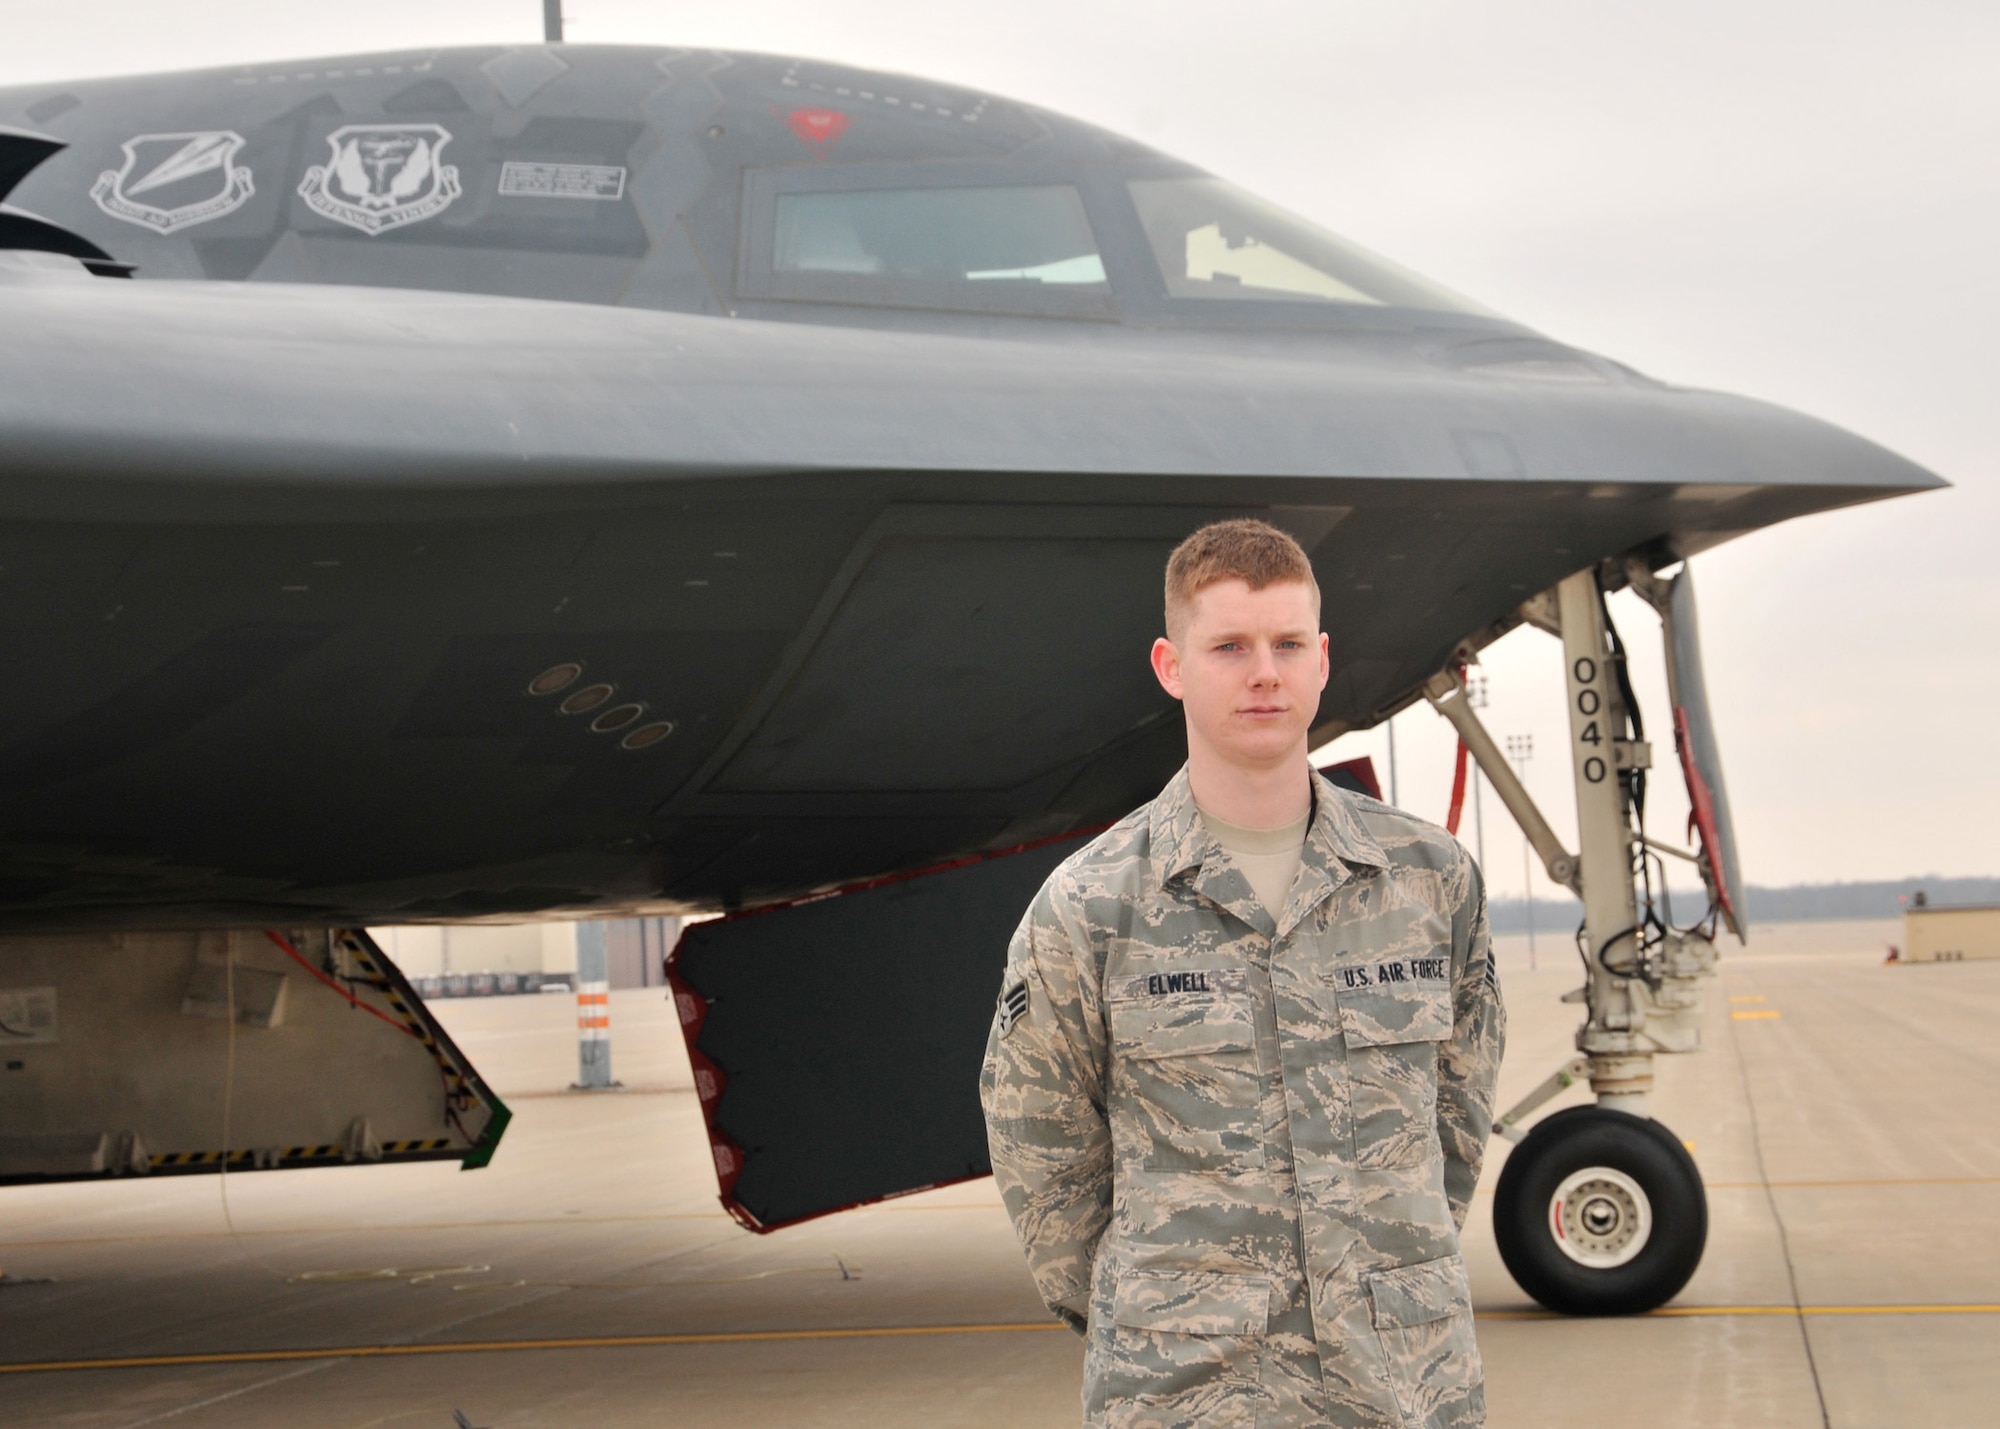 Senior Airman Joseph  Elwell, 131st Bomb Wing, is the 2012 Airman of the Year for the Missouri Air National Guard. Elwell, pictured here with a B-2 Stealth Spirit at Whiteman Air Force Base, is attending Central Missouri State University where he is studying computer information systems. (National Guard photo by Senior Master Sgt. Mary-Dale Amison)